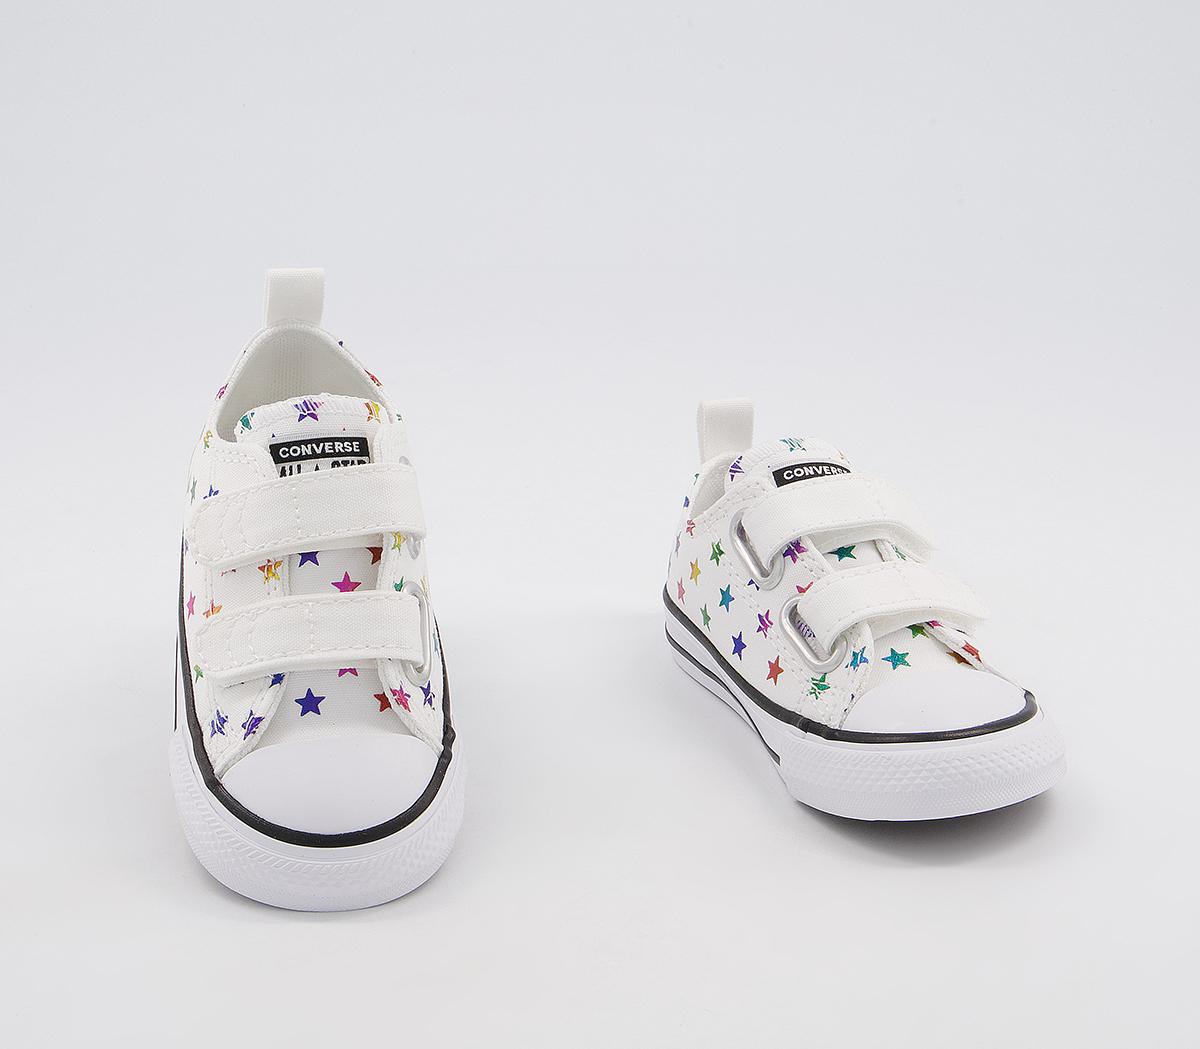 Converse All Star 2vlace Trainers White Black White Foil Stars - Unisex